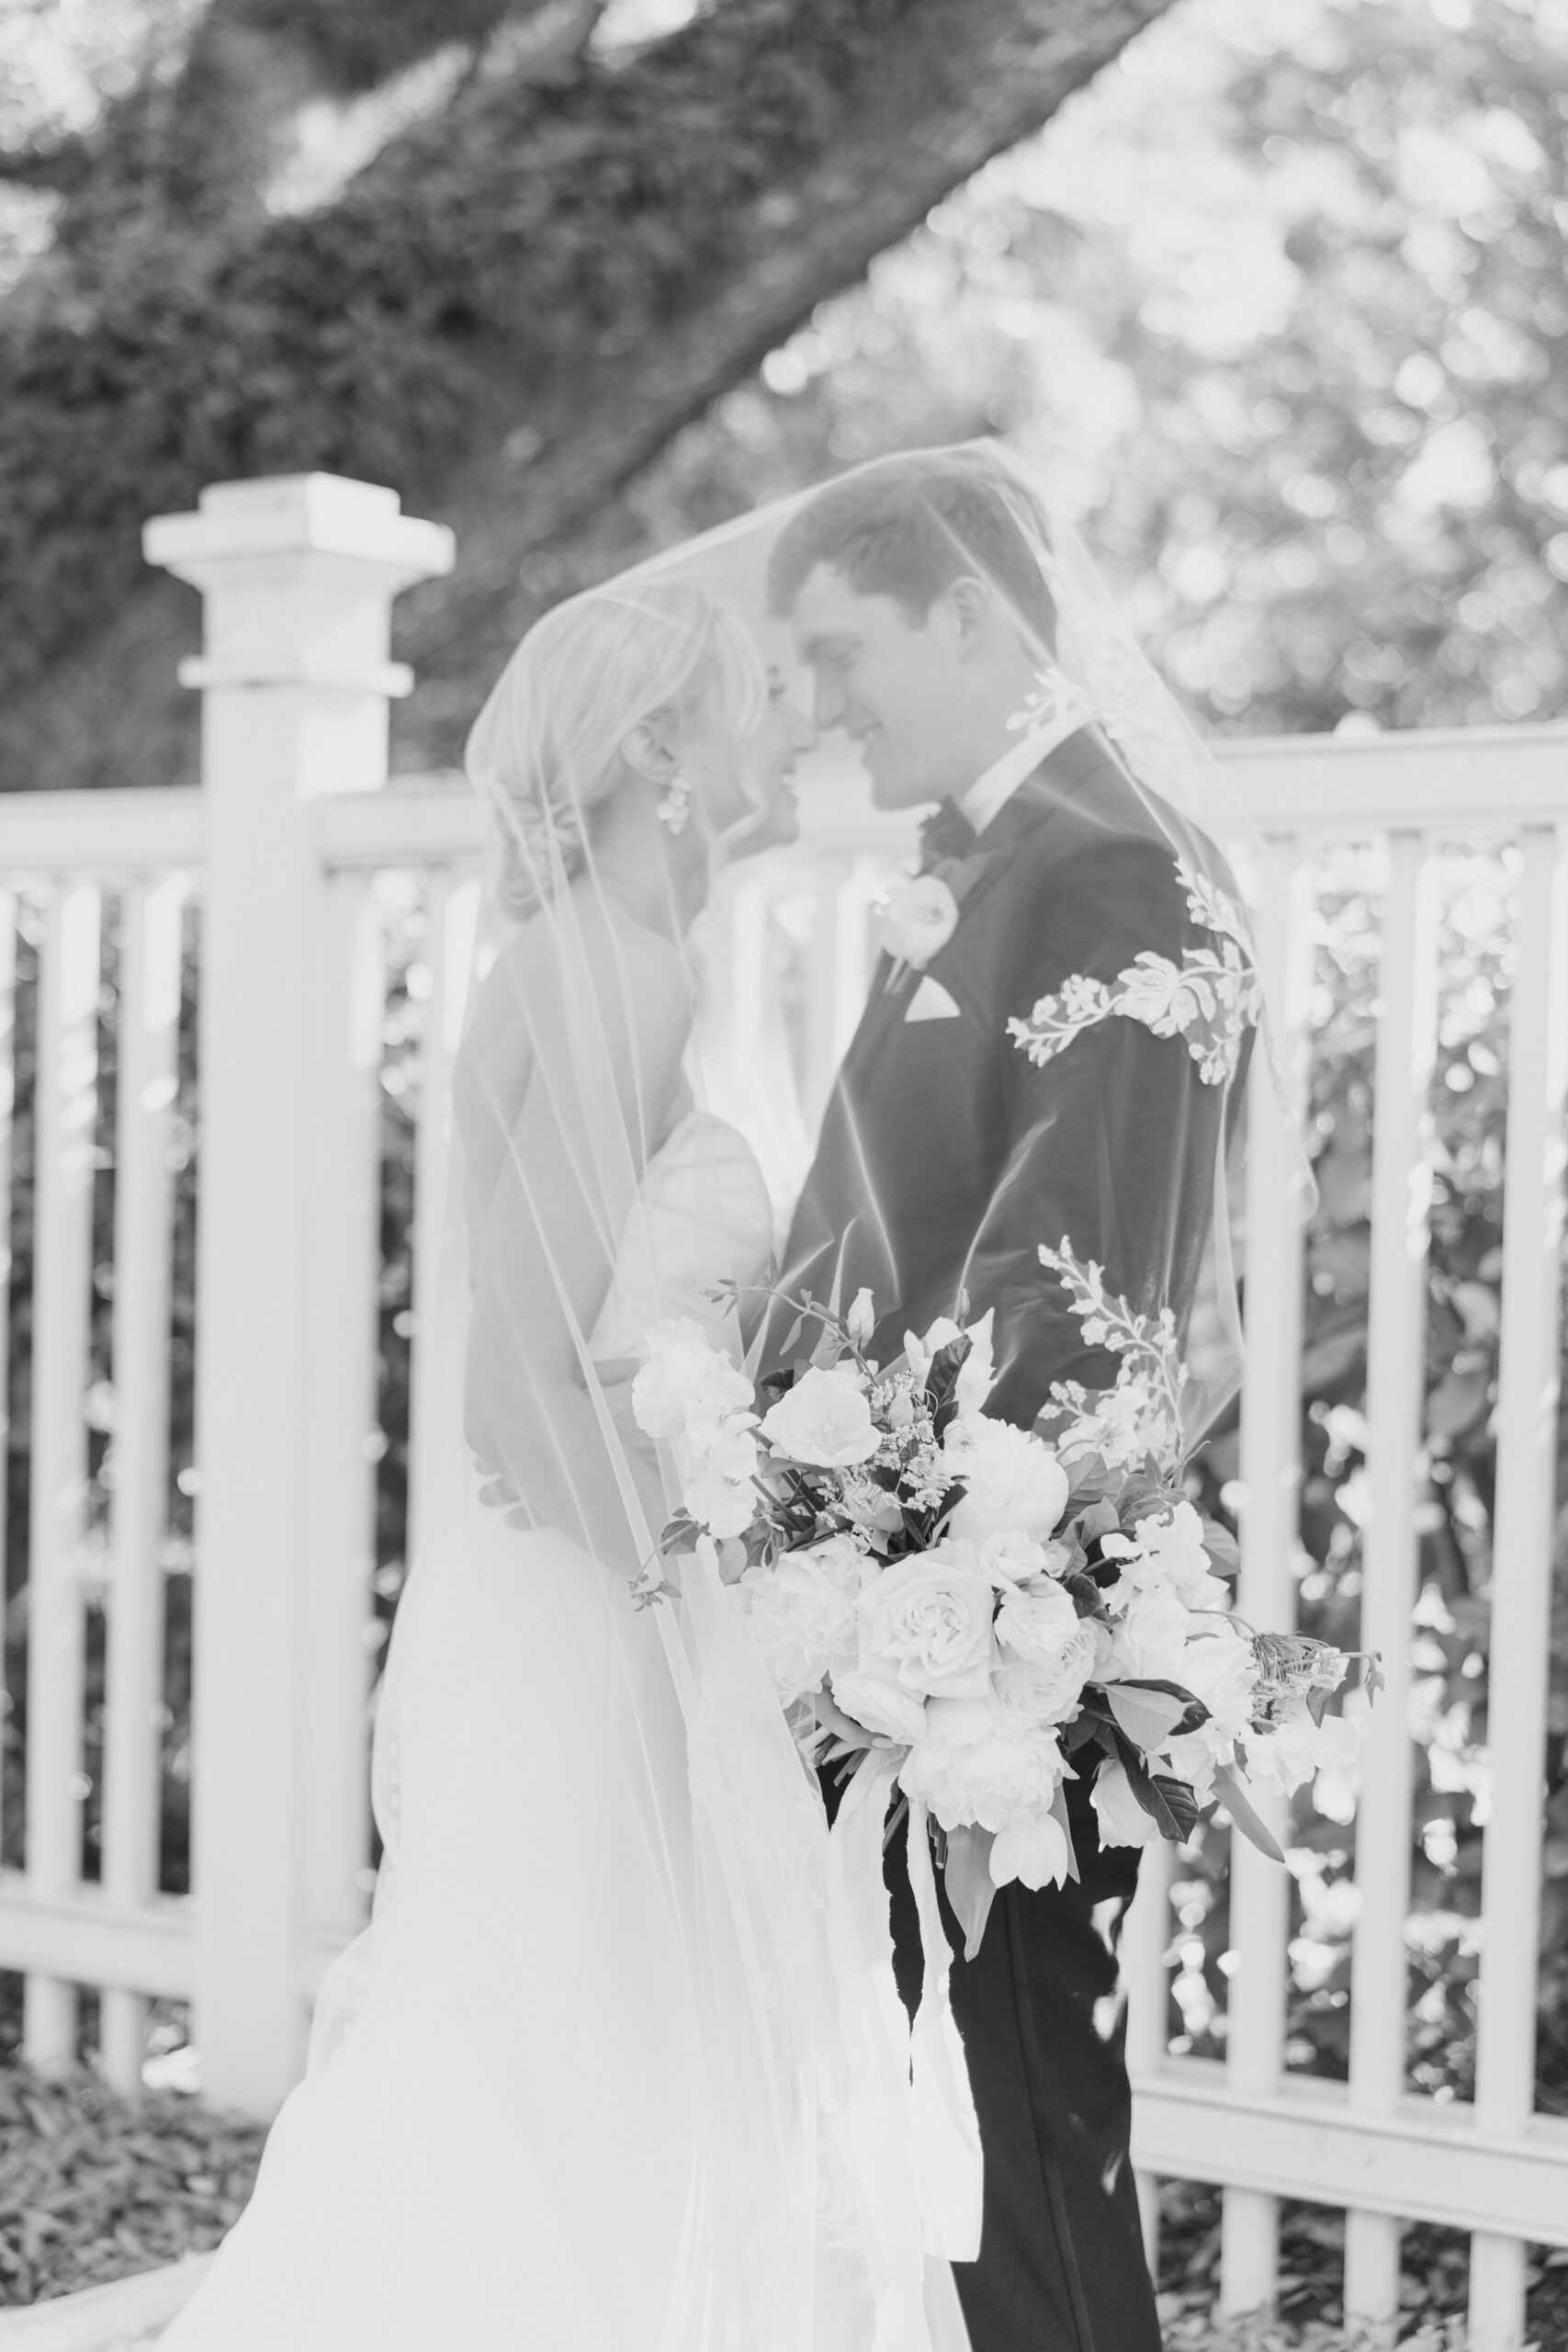 black and white wedding photo. bride and groom covered in flower detailed veil.